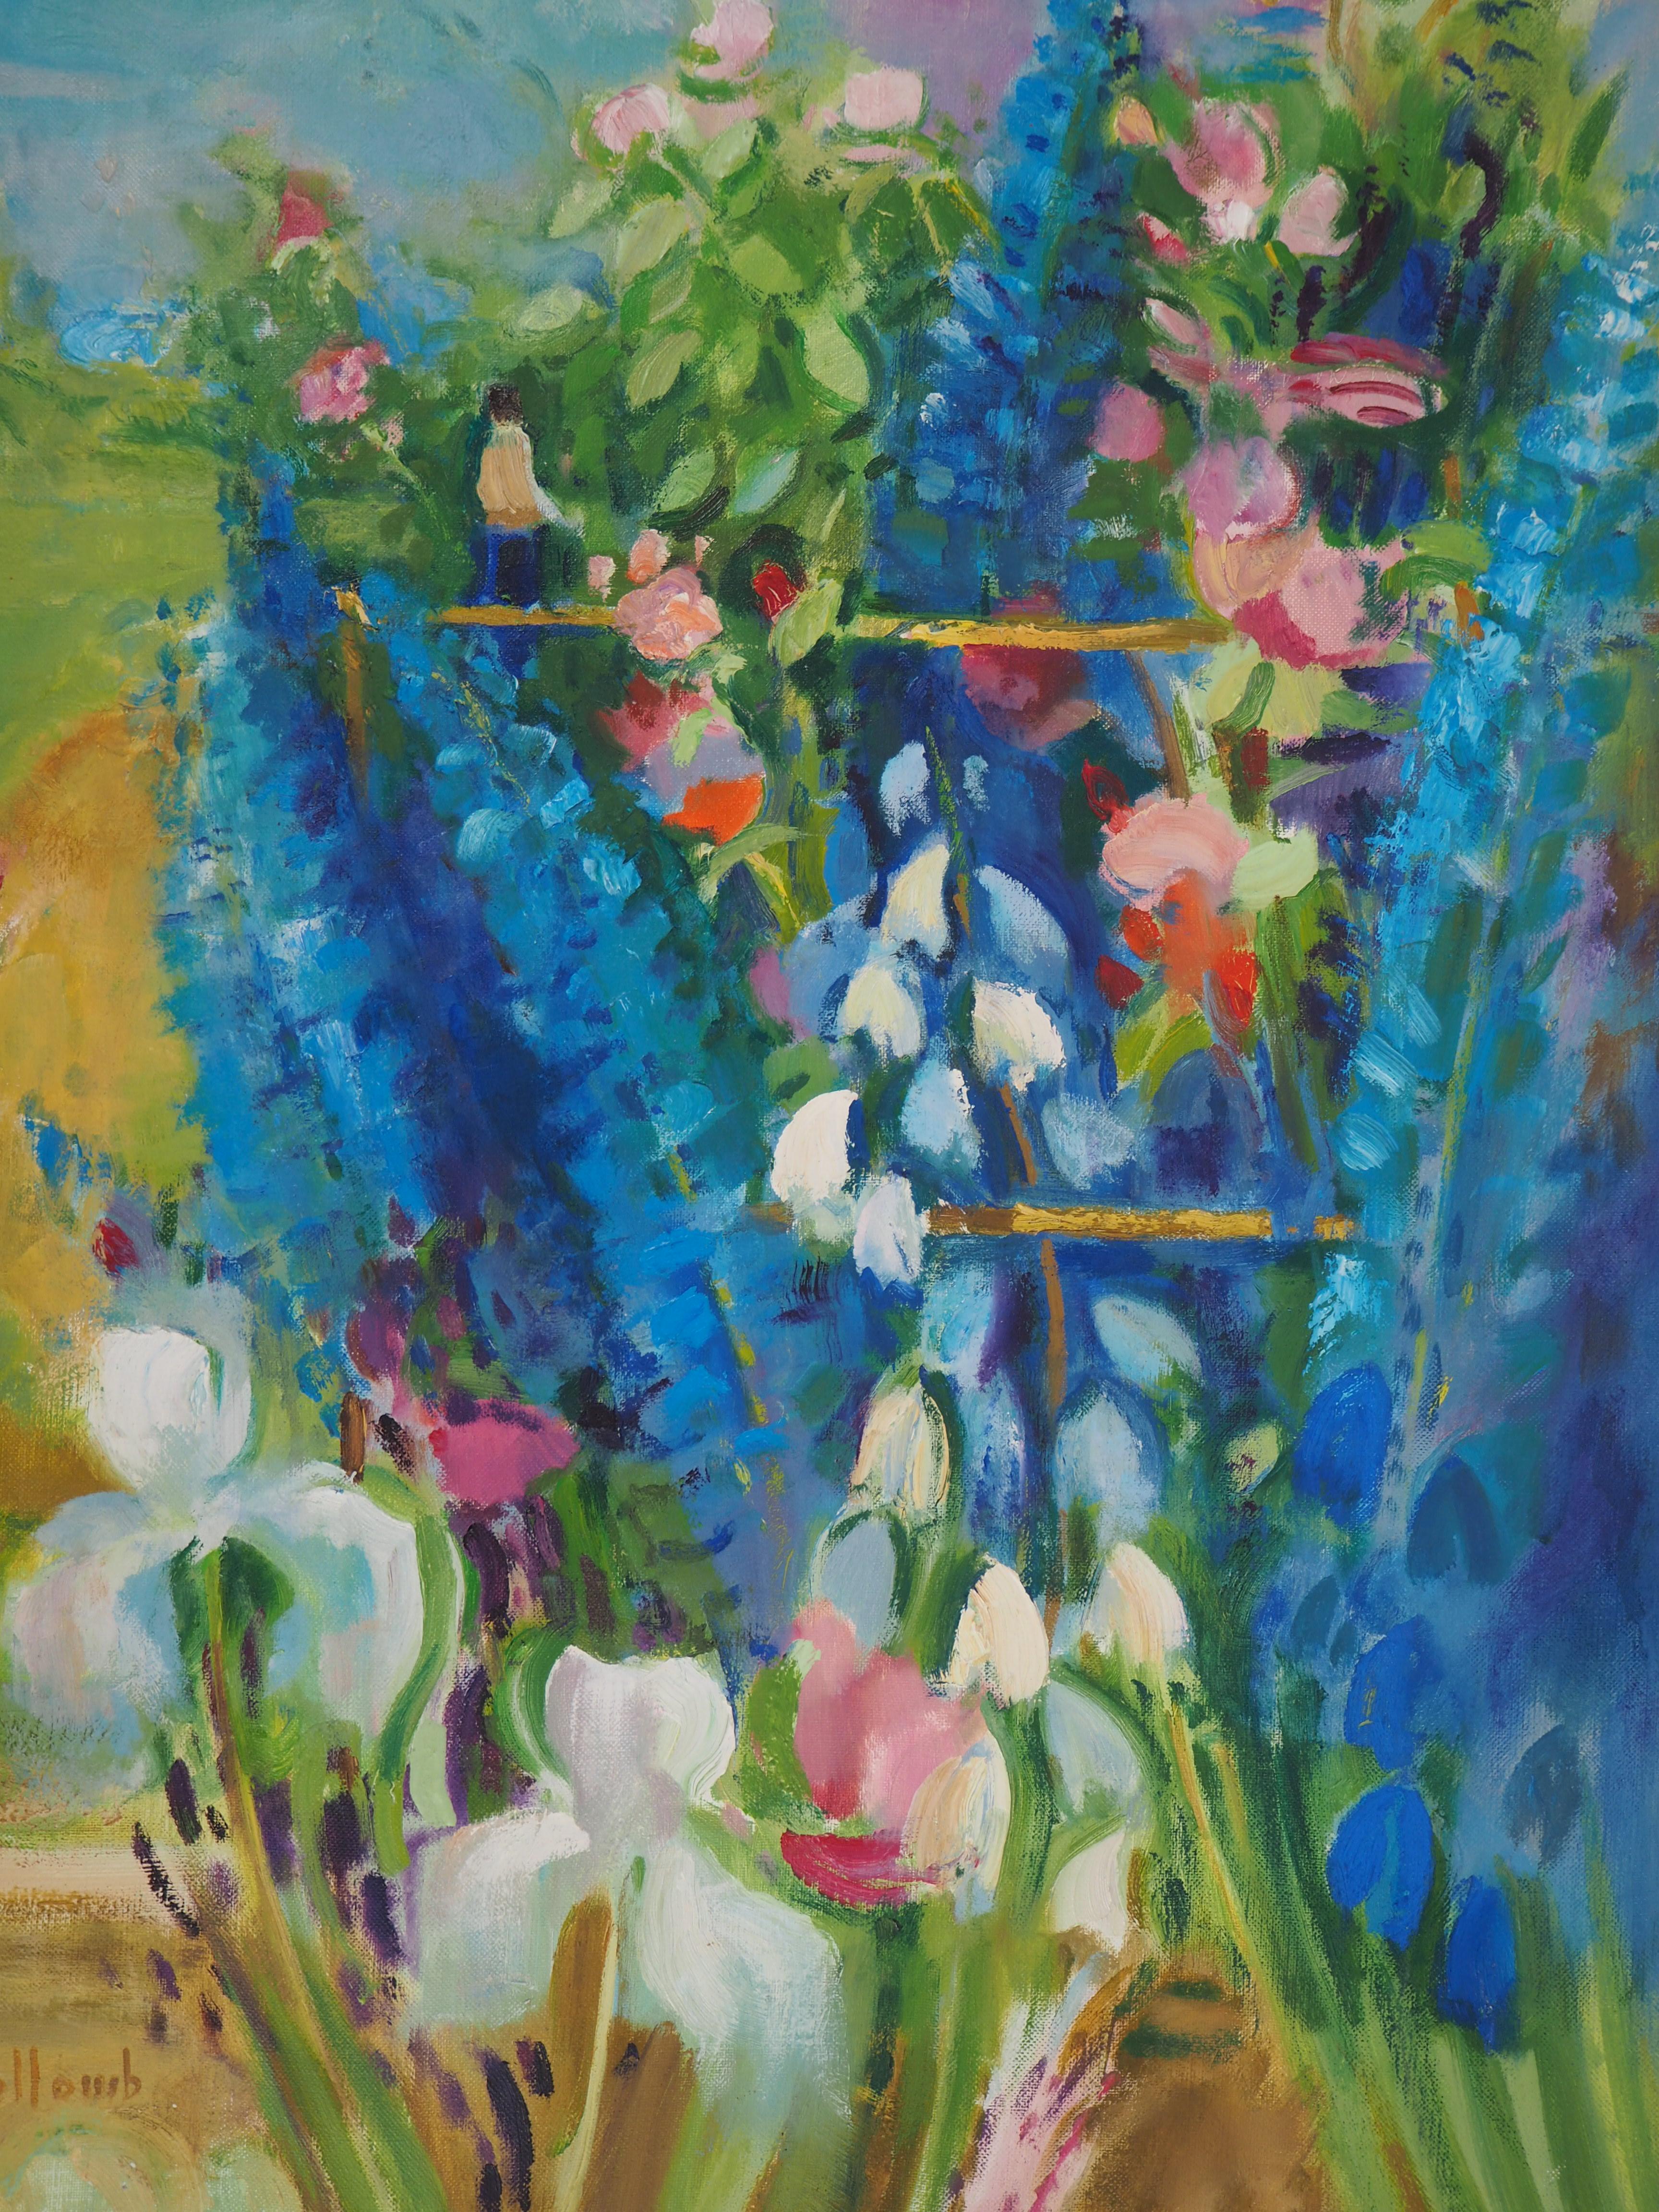 Garden : White Irises and Delphiniums - Original Oil Painting, Handsigned - Gray Landscape Painting by Paul Collomb